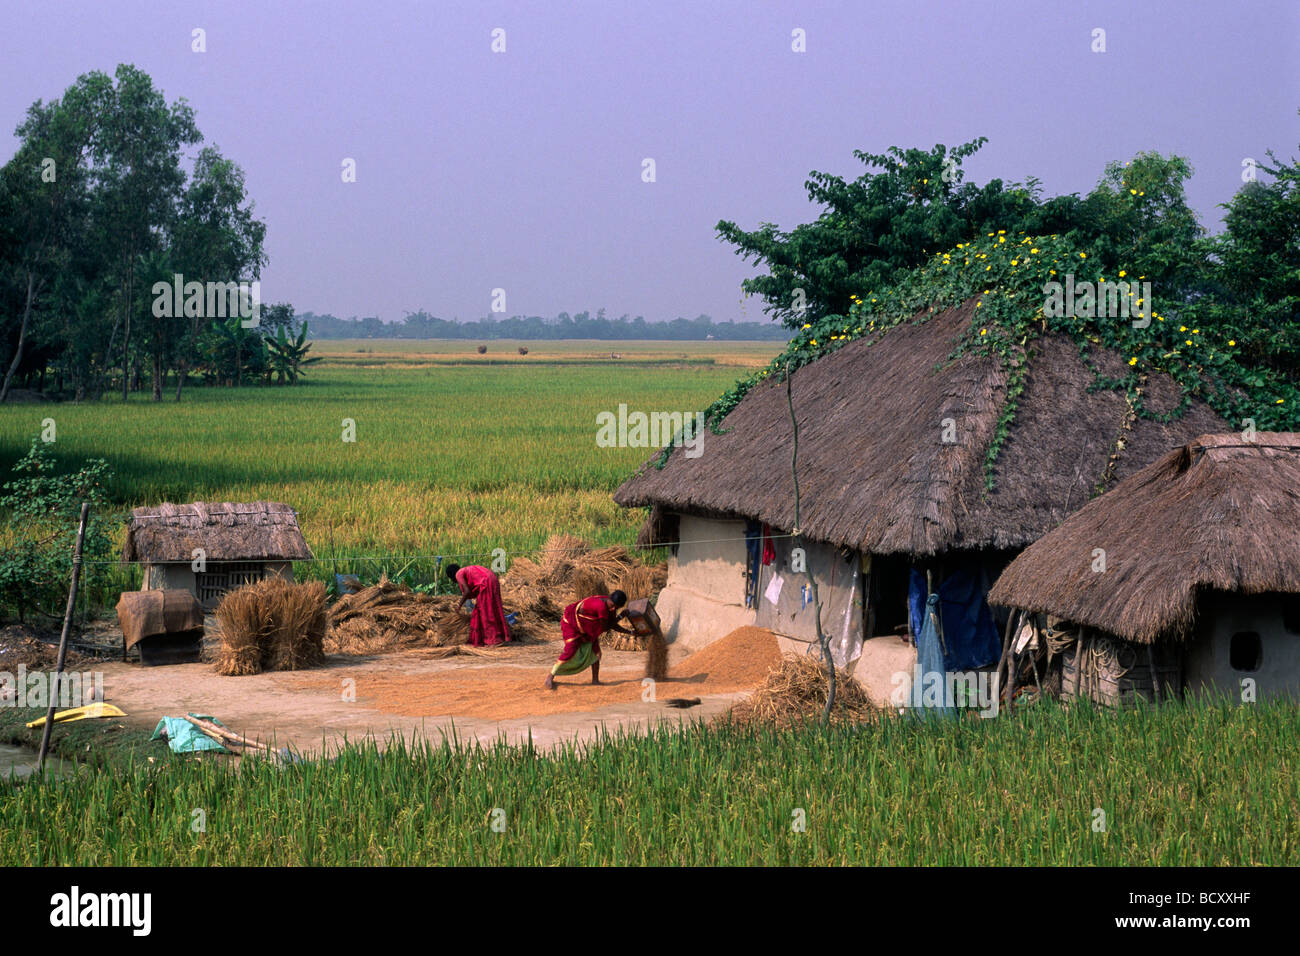 india, west bengal, sunderbans, ganges delta, rice harvest, countryside hut and farmers Stock Photo